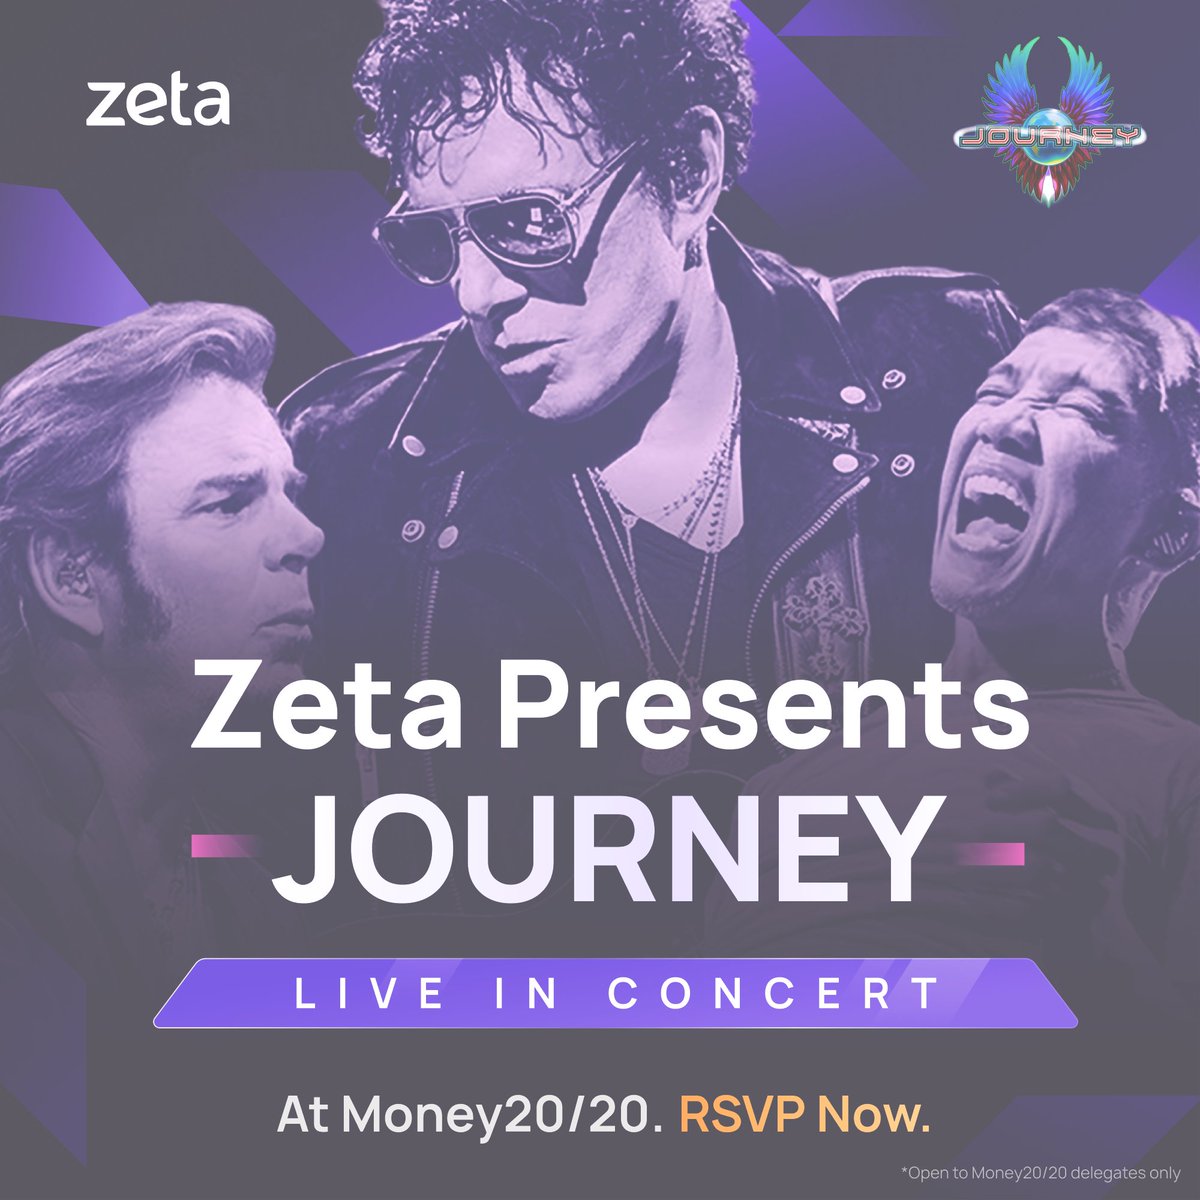 Come Tuesday, I'll be @ZetaSuite's Chief Concert Producer!! Rock icons Journey will headline our huge party at @Money2020 to debut Zeta's platform for next-gen credit cards! If you're there, we'd love to meet you and have you meet our team. RSVP here: journey.zeta.tech